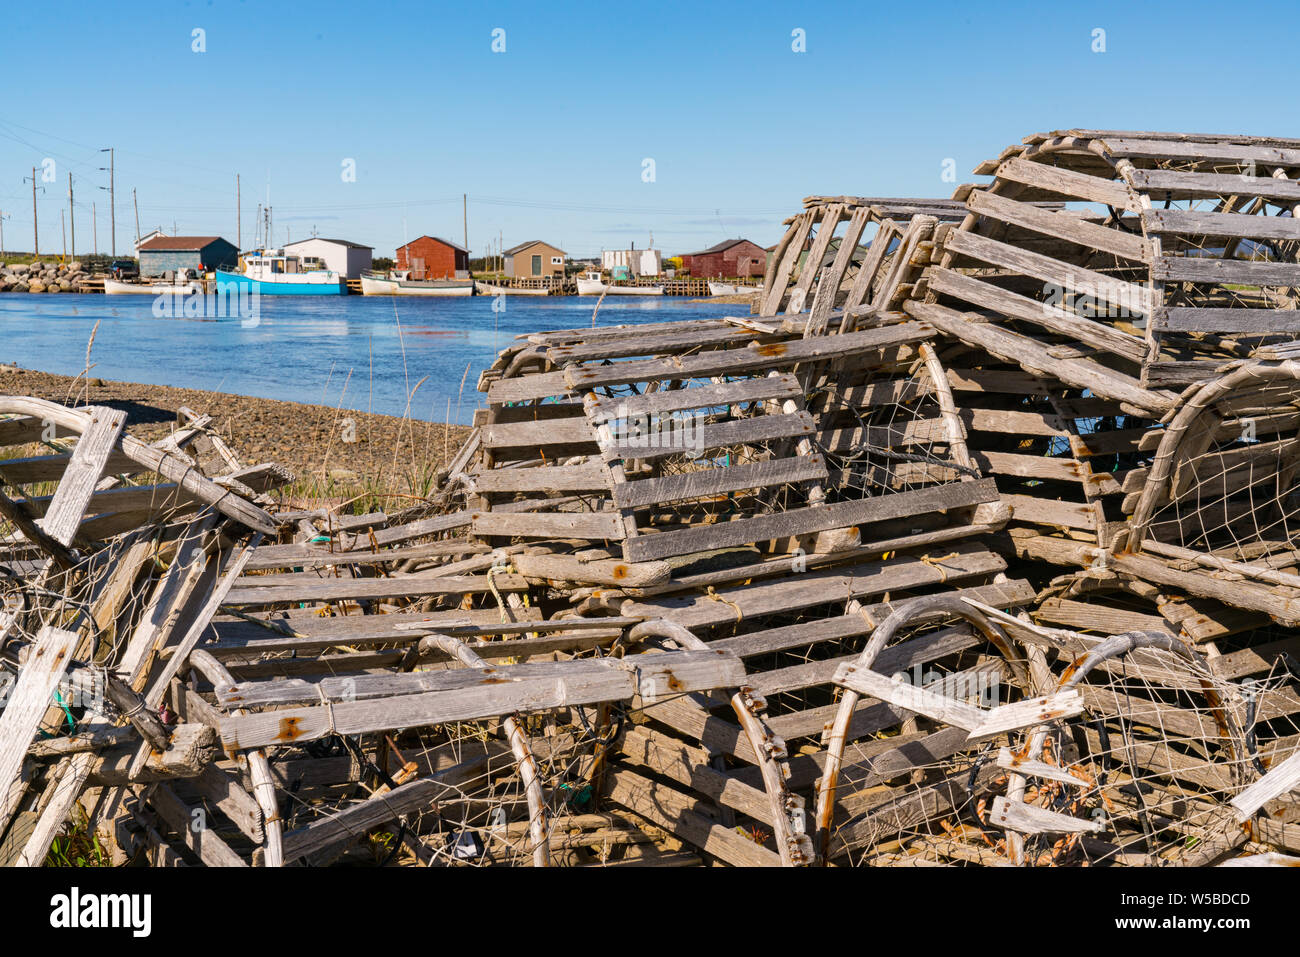 Old wooden lobster traps and fishing boats in a fishing village in Newfoundland, Canada Stock Photo